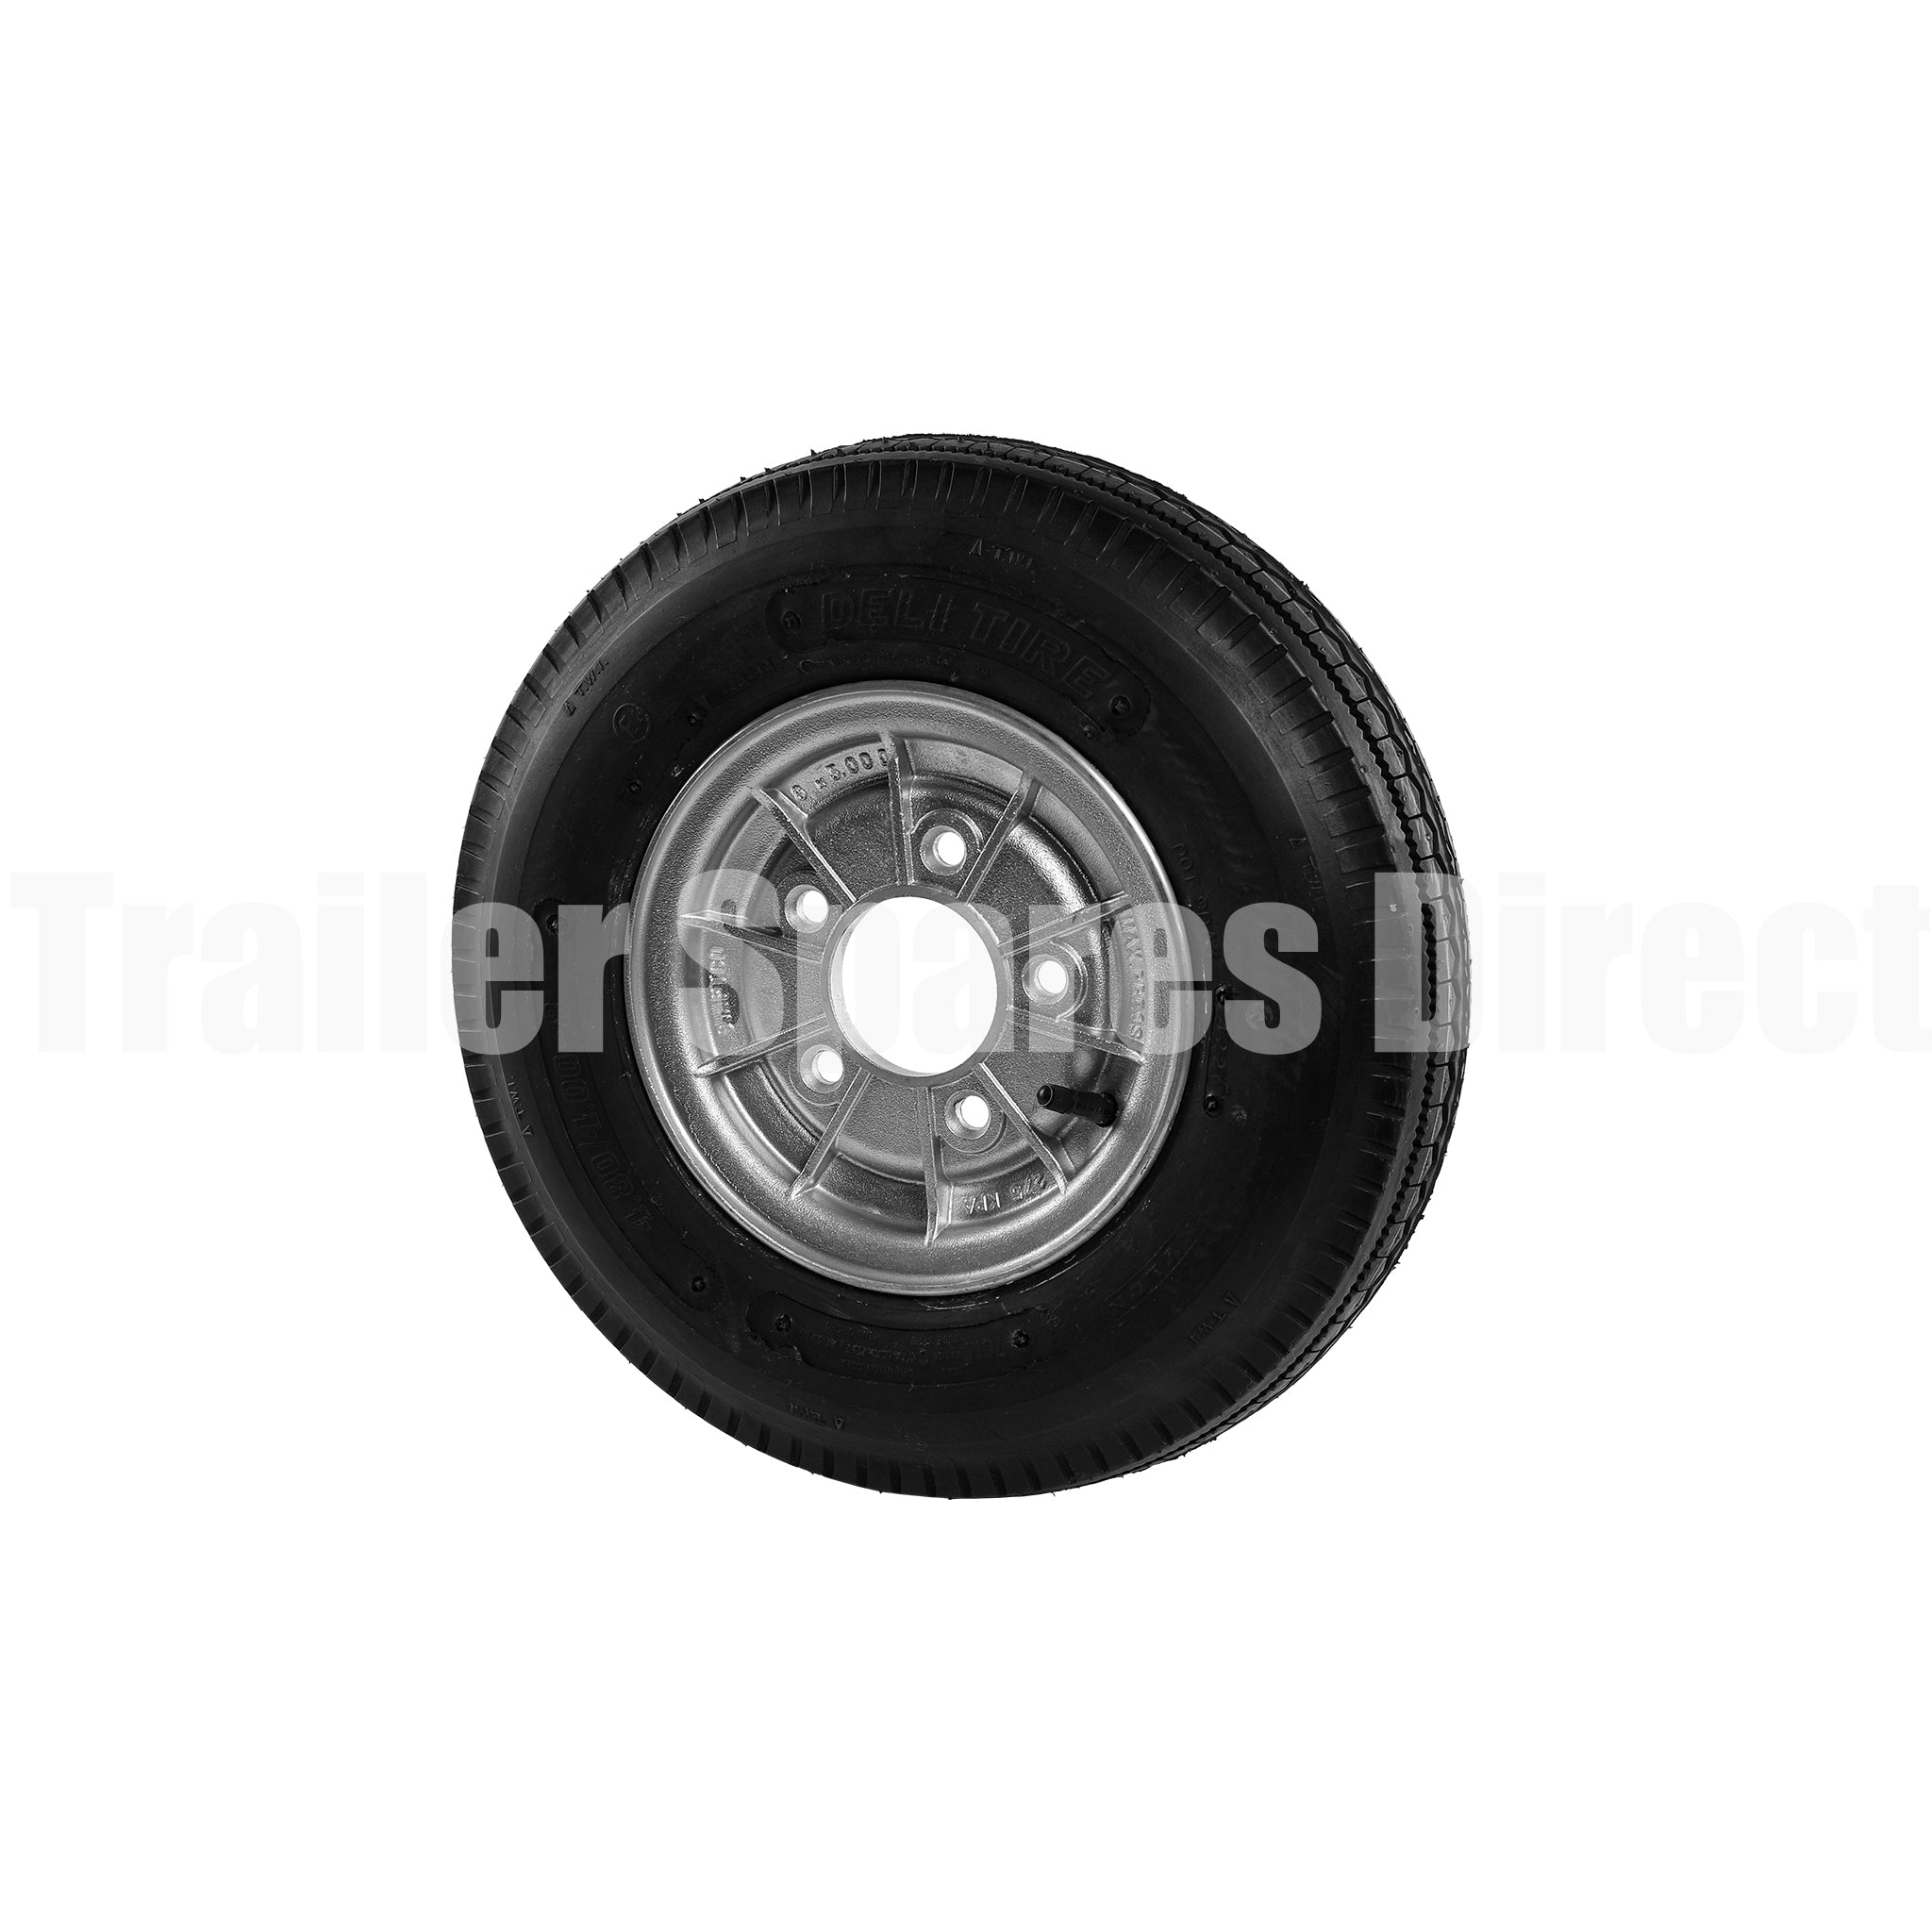 Assembled 8 inch alloy rim HT pattern with tyre